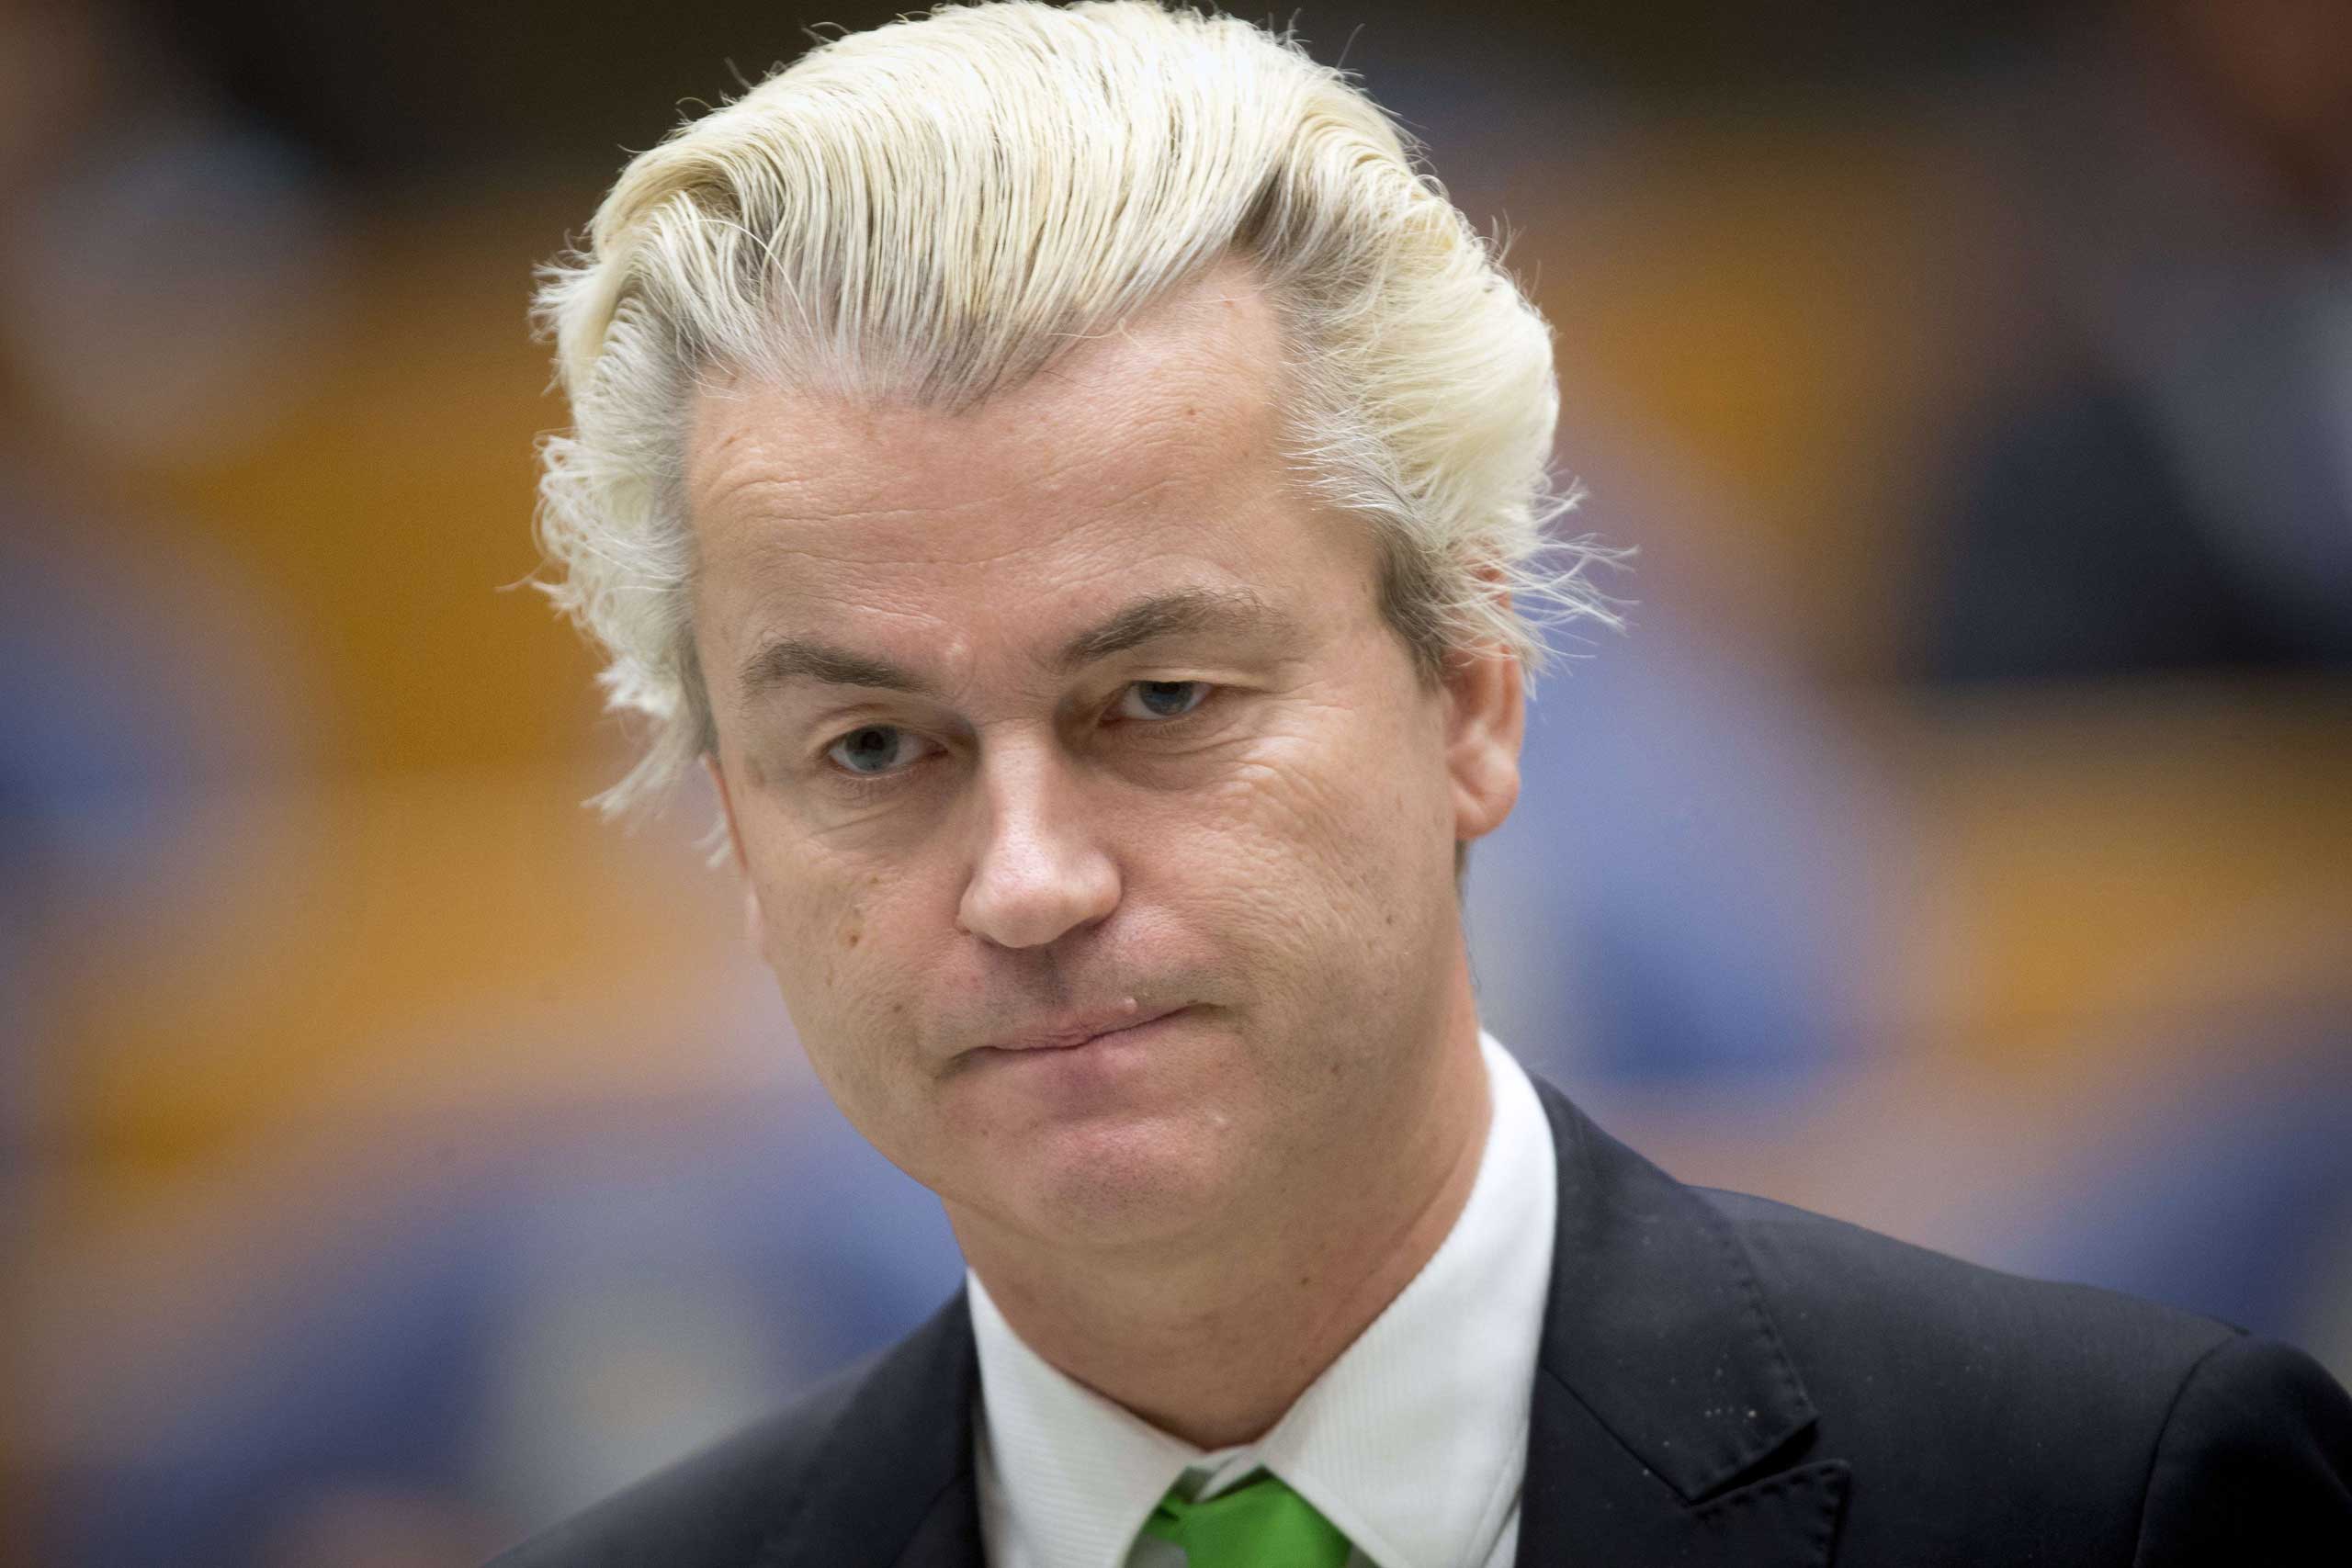 Dutch far-right politician Geert Wilders of the Party for Freedom stands at the parliamentary building in the Hague on Dec. 18, 2014 (Evert-Jan Daniels—AFP/Getty Images)